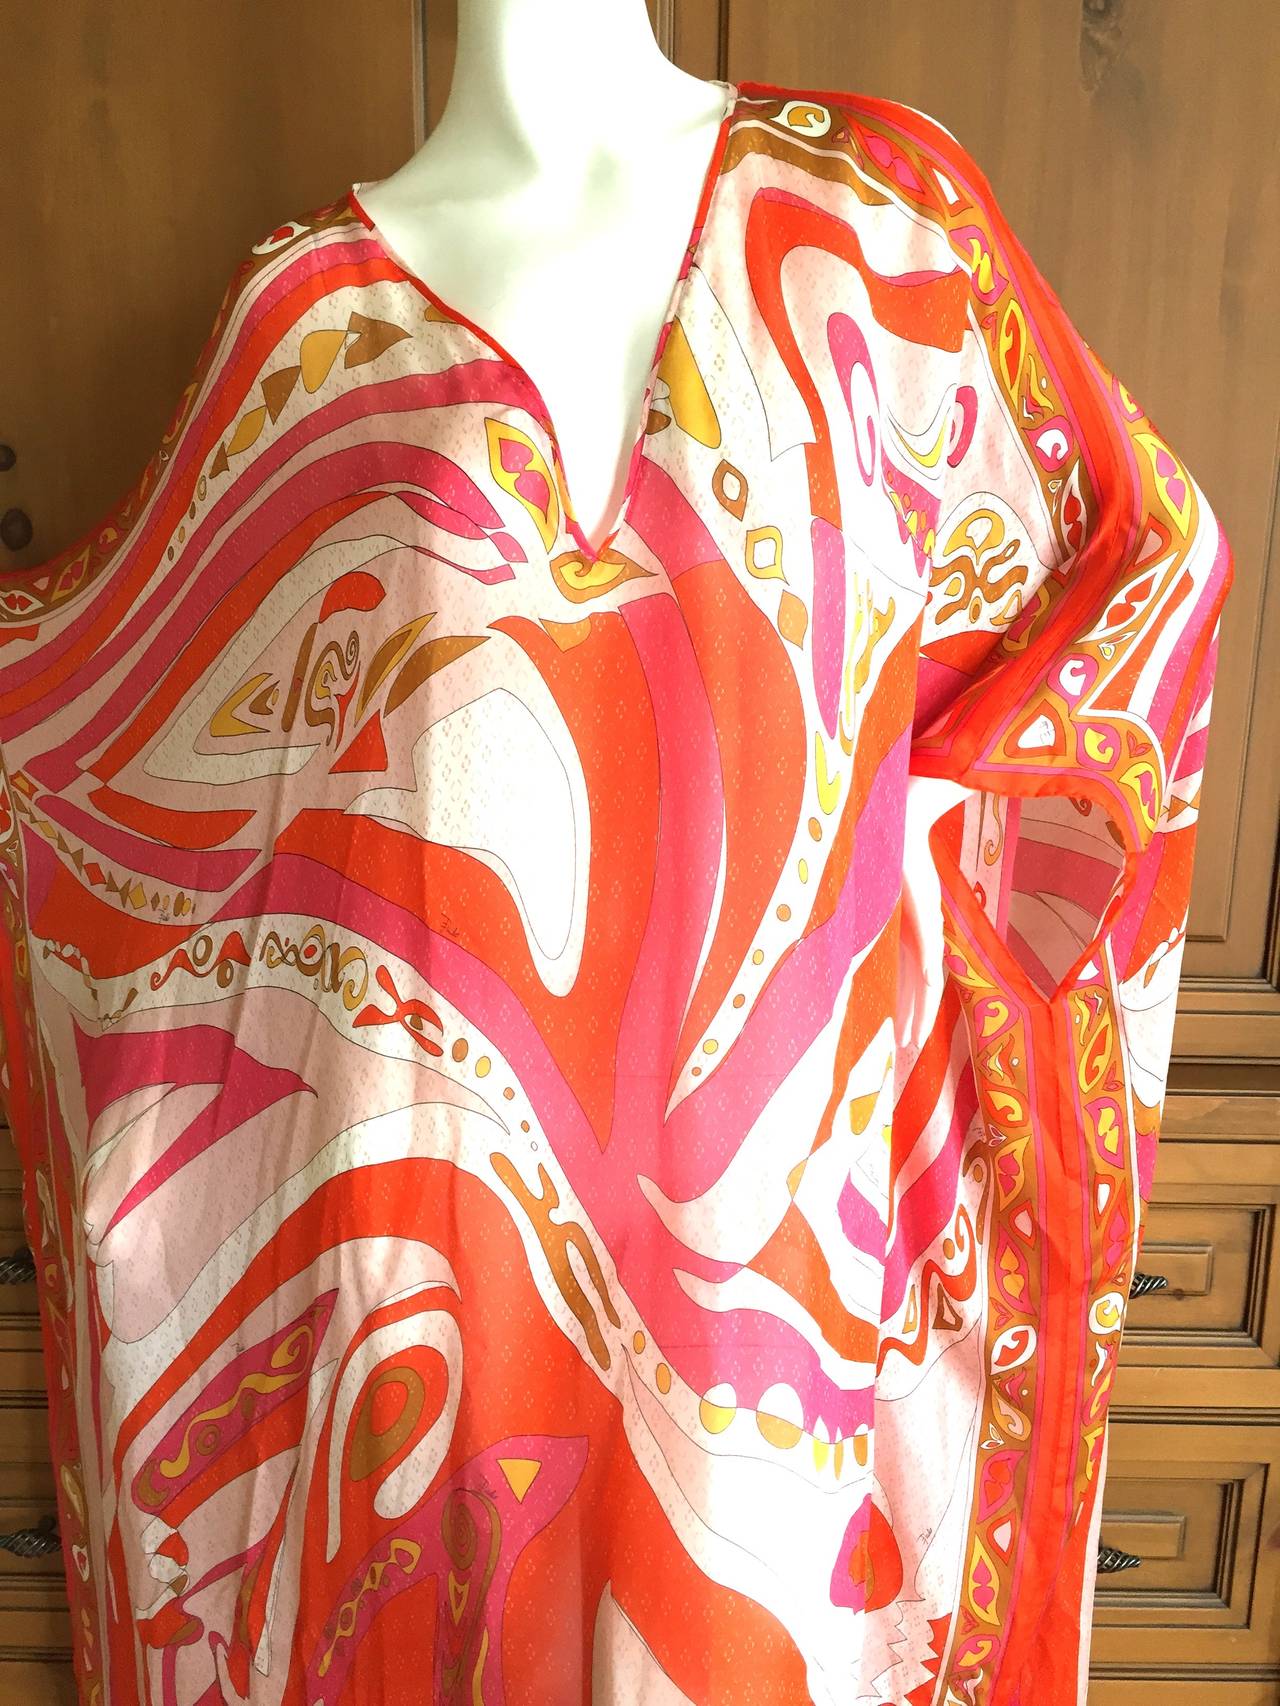 Emilio Pucci SIlk Caftan or Beach Cover Up.
Luscious pinks and oranges.
New with Tags